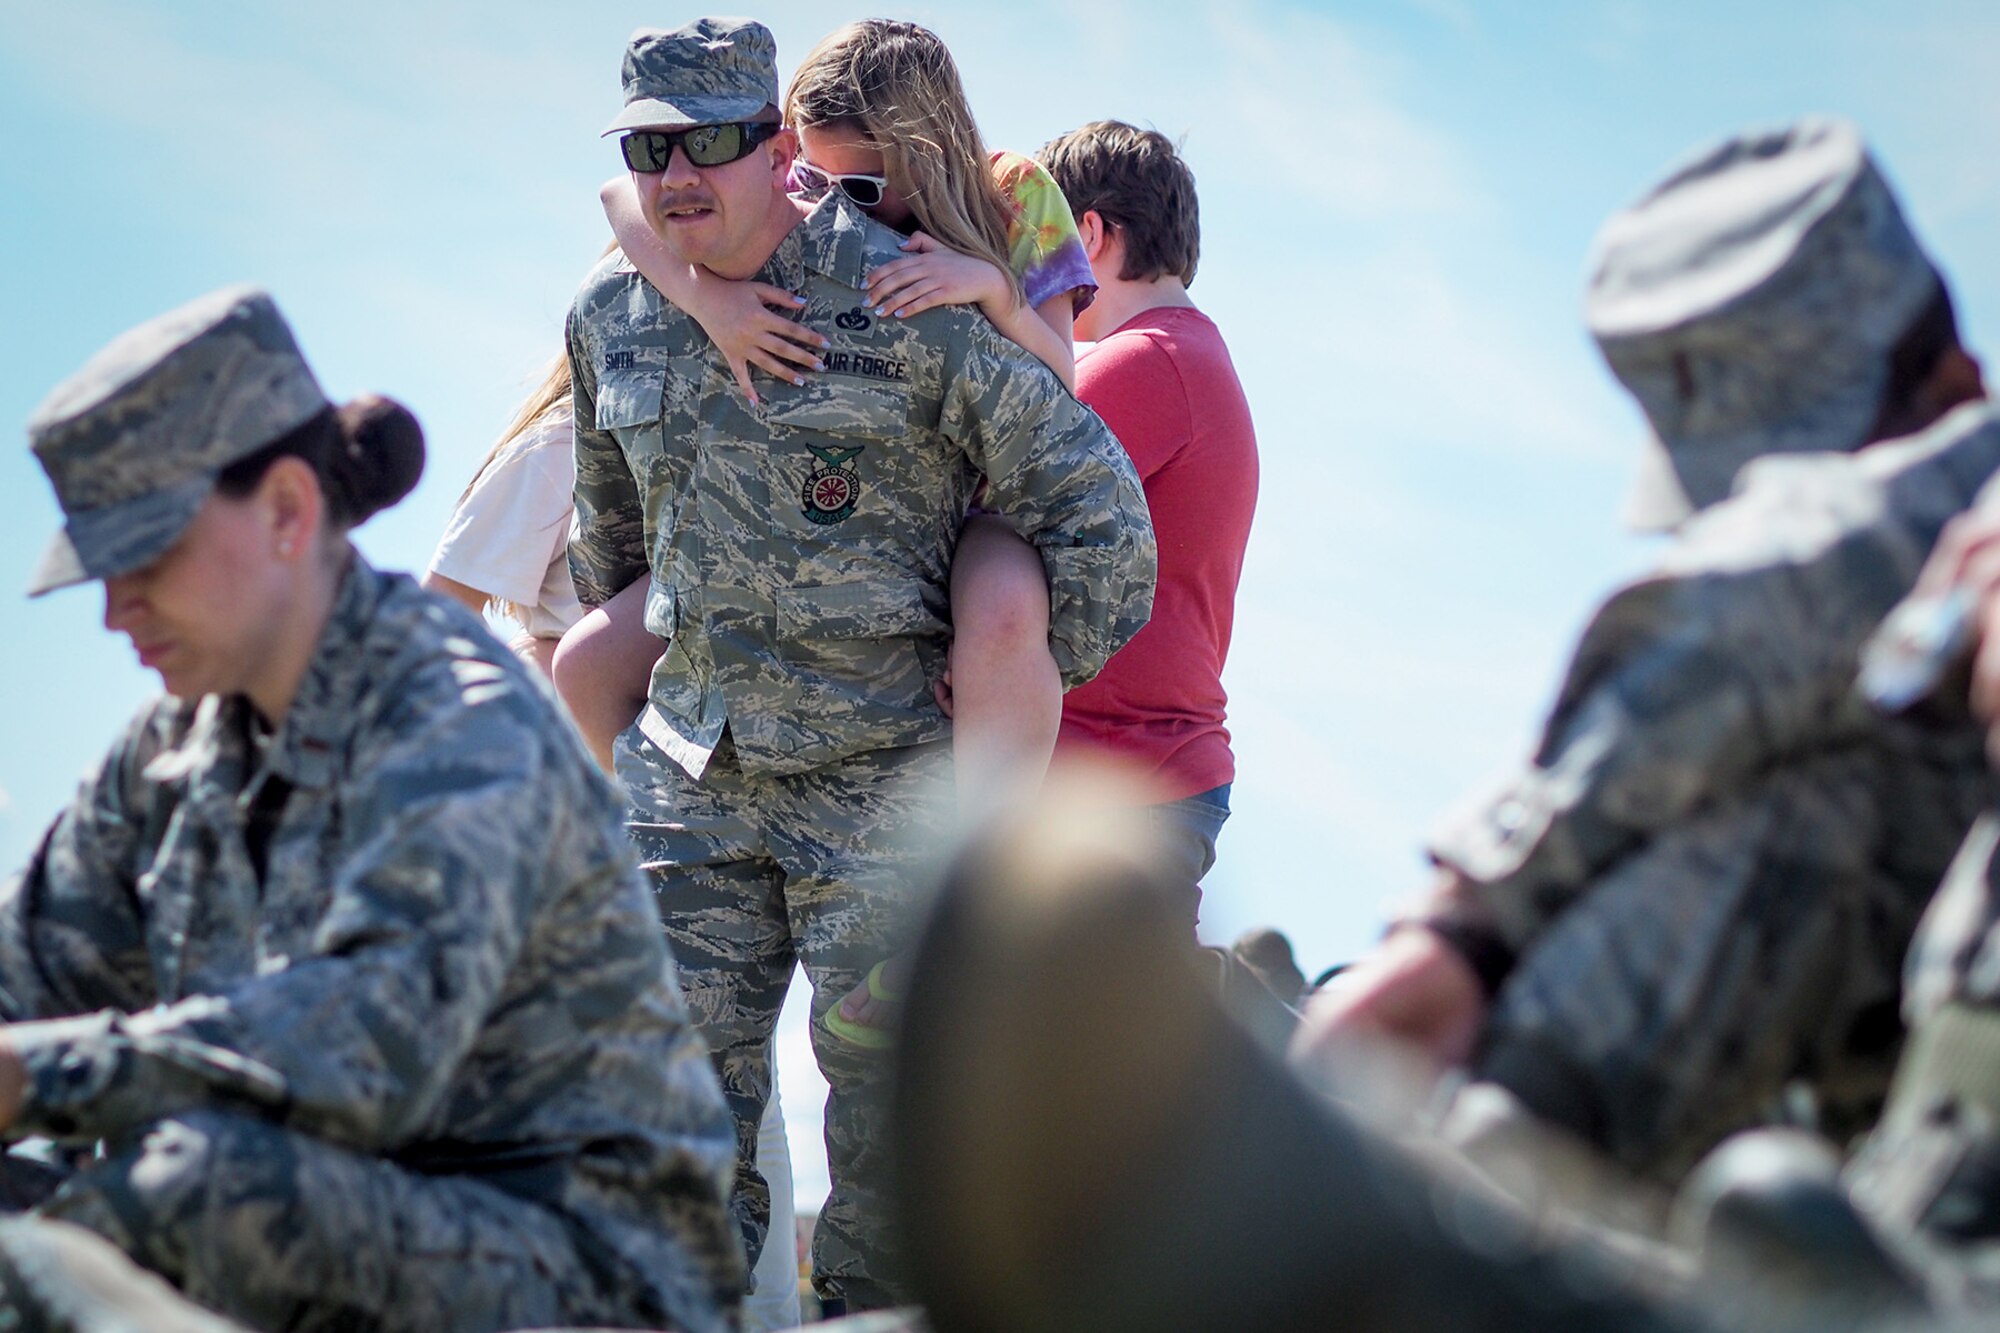 Aubrey Smith, 11, hugs her father Air Force Senior Master Sgt. John Smith, a 176th Civil Engineer Squadron firefighter, as service members, dependents, and Department of Defense civilians attend the Military Appreciation Week picnic at the Joint Base Elmendorf-Richardson, Alaska, Buckner Fitness Center fields June 16, 2017. Several organizations came together to provide a variety of family-fun activities such as competitive sporting events for the adults, face painting and bouncy houses for the children in addition to the Anchorage Chamber of Commerce-provided food and music during the annual event.